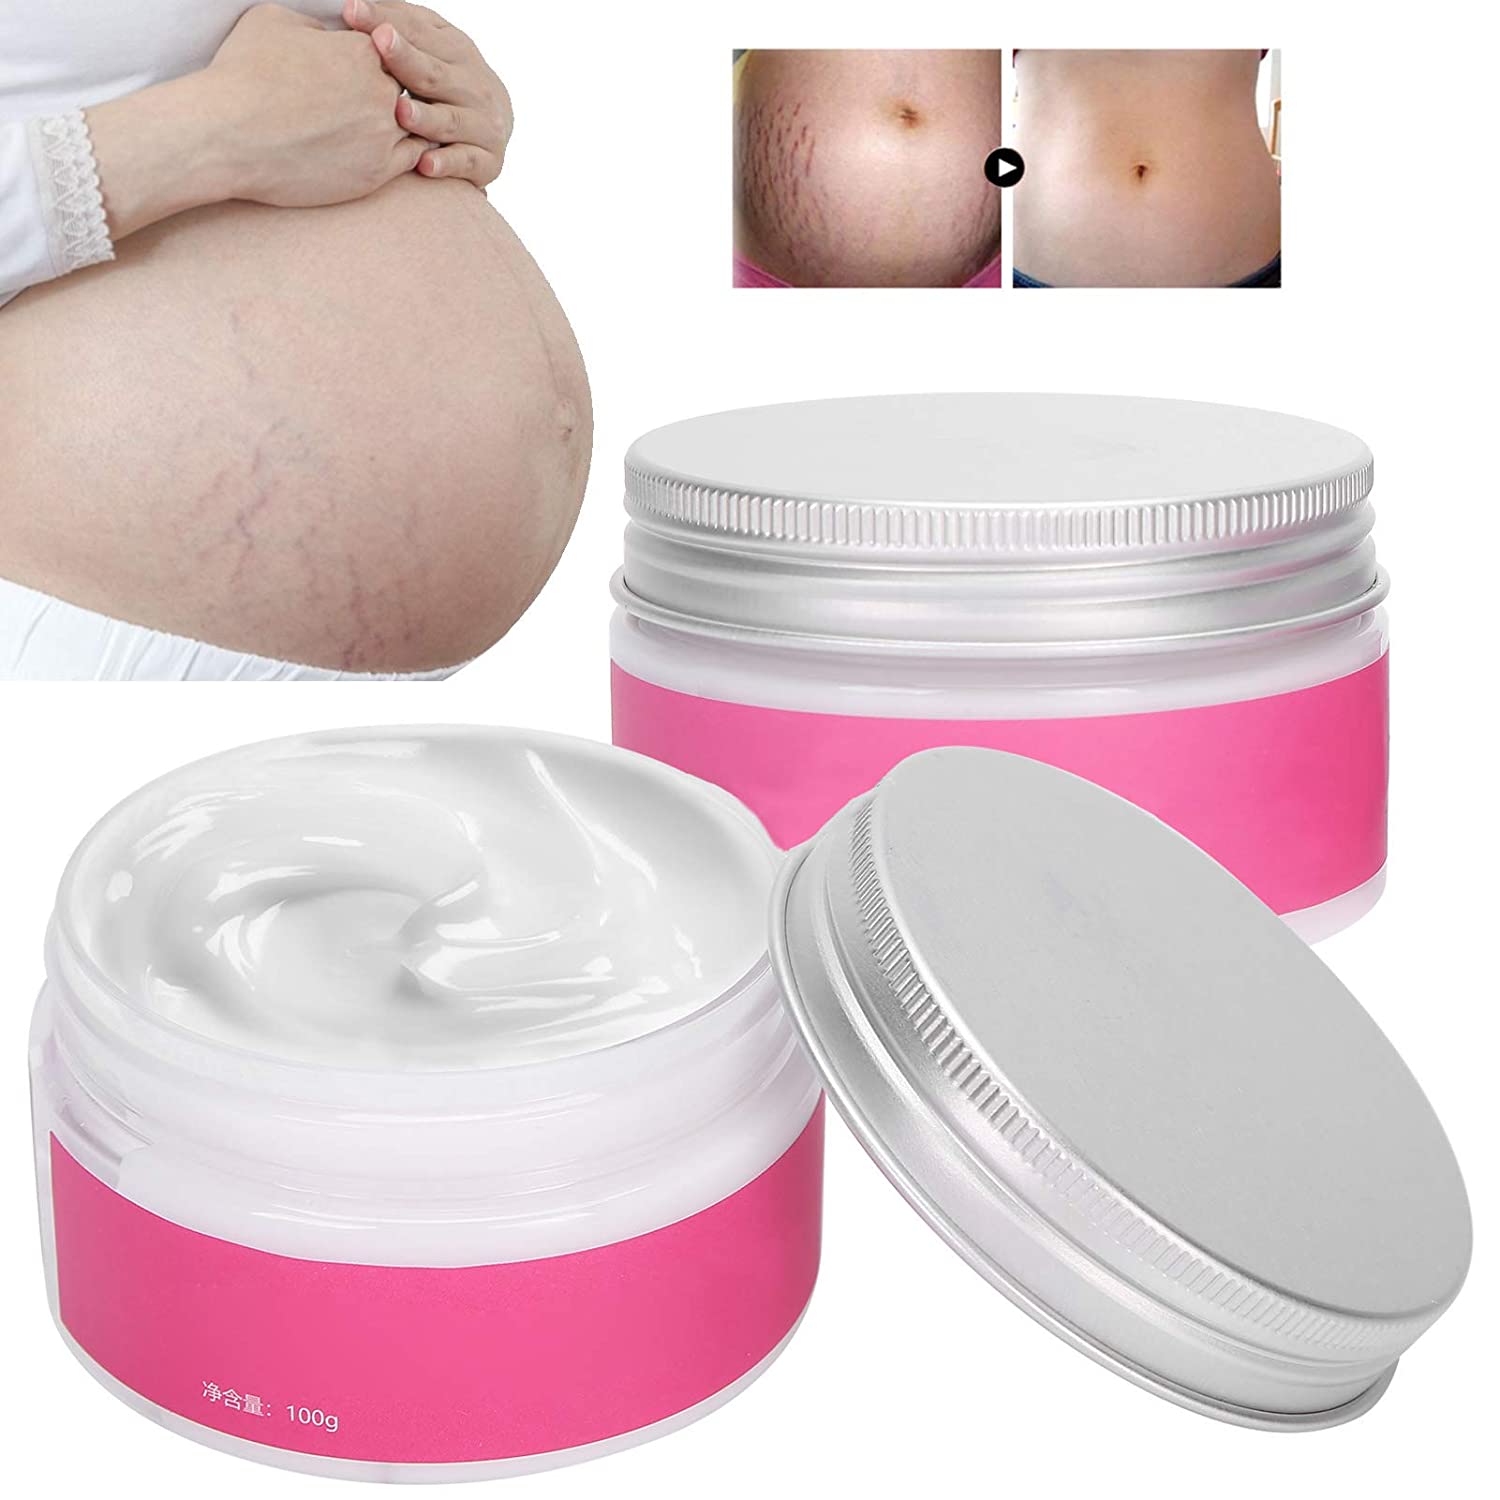 Betued Pack of 2 Stretch Marks Cream, Scar Ointment, Stretch Marks, Repair Cream, Skin Firming Pregnancy Scars Removal Repair Cream